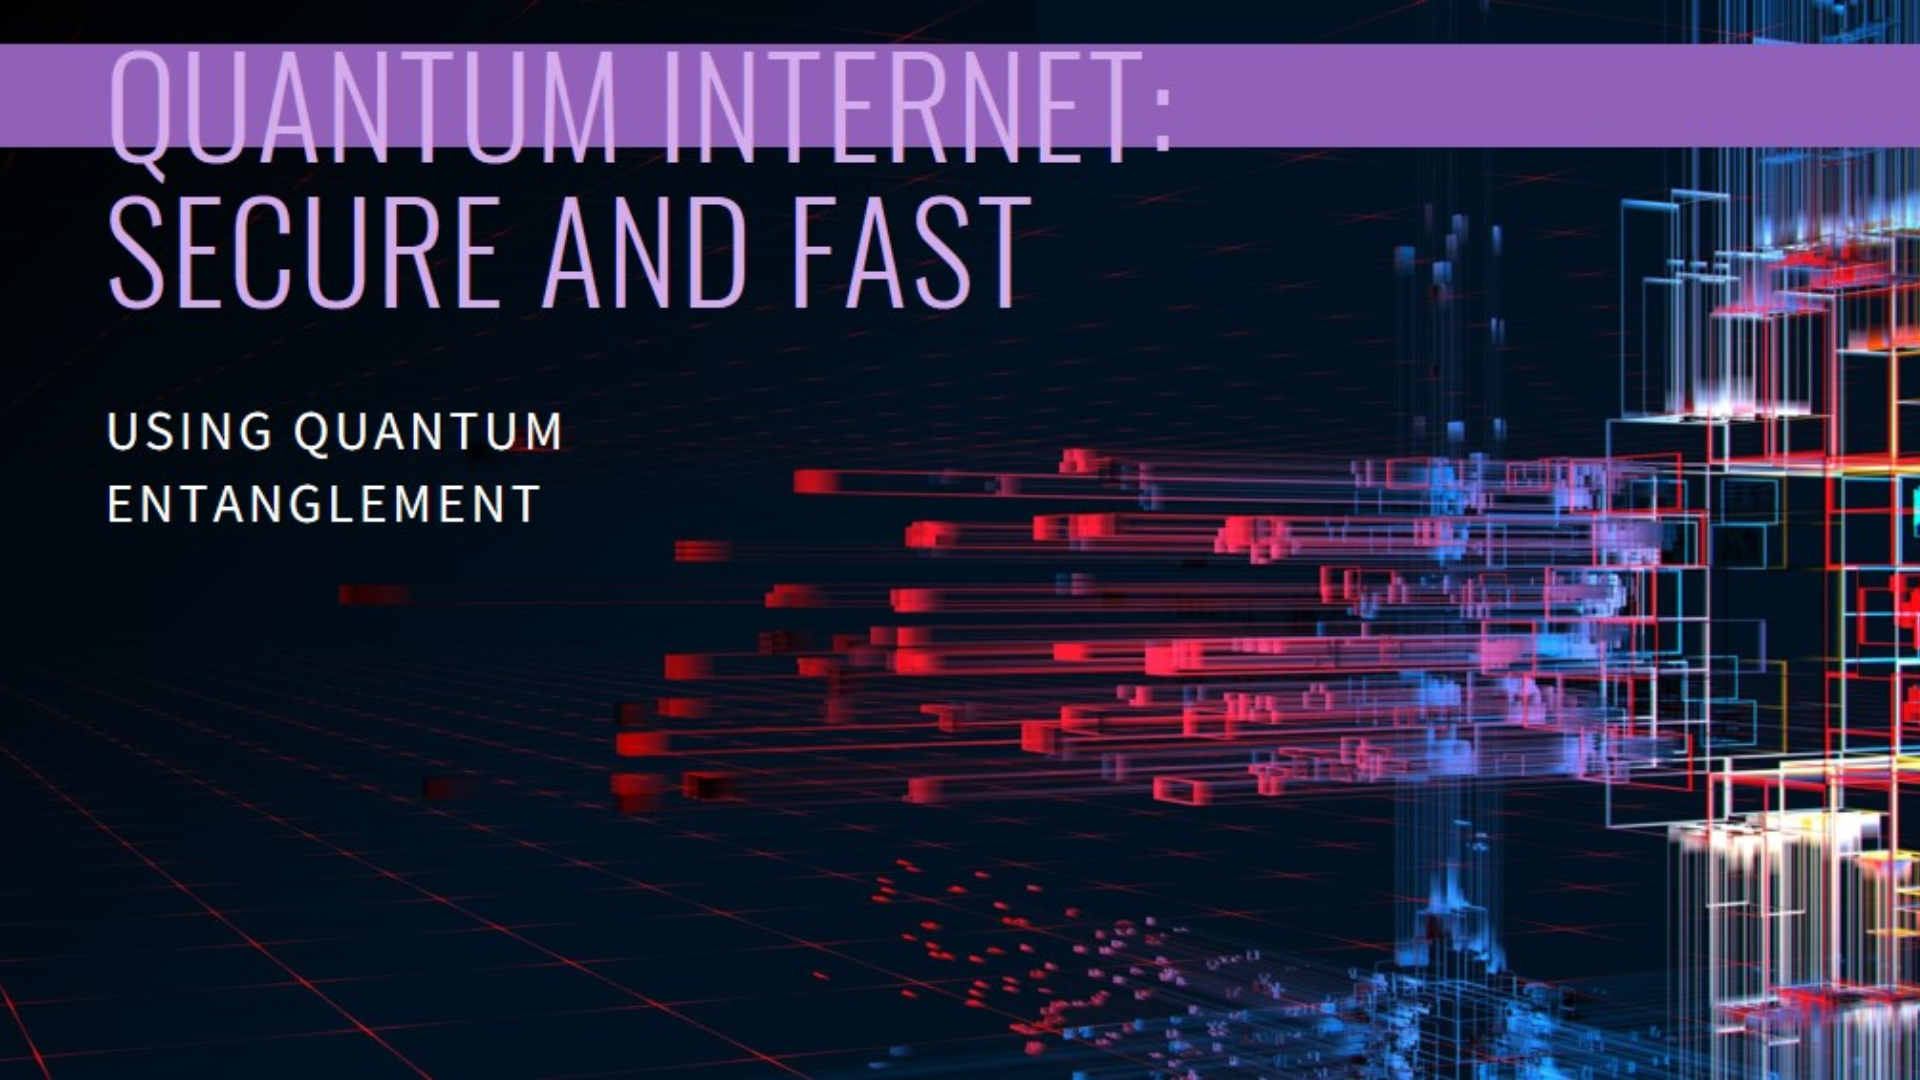 Explore the future of communication with the quantum internet. Learn how quantum entanglement enables secure, fast data transfer and advanced applications.